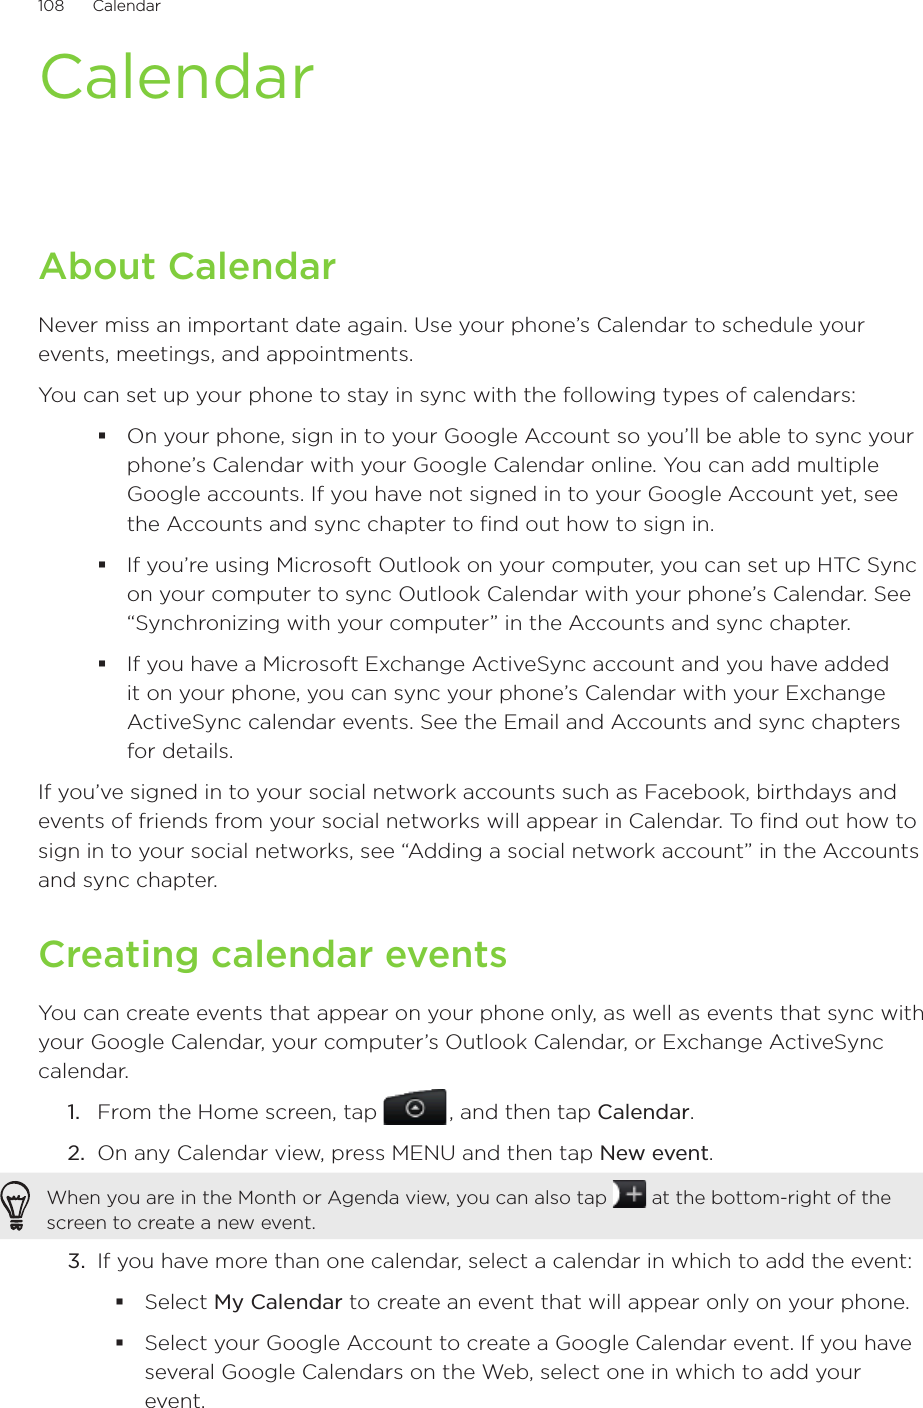 108      Calendar      CalendarAbout CalendarNever miss an important date again. Use your phone’s Calendar to schedule your events, meetings, and appointments.You can set up your phone to stay in sync with the following types of calendars:On your phone, sign in to your Google Account so you’ll be able to sync your phone’s Calendar with your Google Calendar online. You can add multiple Google accounts. If you have not signed in to your Google Account yet, see the Accounts and sync chapter to find out how to sign in.If you’re using Microsoft Outlook on your computer, you can set up HTC Sync on your computer to sync Outlook Calendar with your phone’s Calendar. See “Synchronizing with your computer” in the Accounts and sync chapter.If you have a Microsoft Exchange ActiveSync account and you have added it on your phone, you can sync your phone’s Calendar with your Exchange ActiveSync calendar events. See the Email and Accounts and sync chapters for details.If you’ve signed in to your social network accounts such as Facebook, birthdays and events of friends from your social networks will appear in Calendar. To find out how to sign in to your social networks, see “Adding a social network account” in the Accounts and sync chapter.Creating calendar eventsYou can create events that appear on your phone only, as well as events that sync with your Google Calendar, your computer’s Outlook Calendar, or Exchange ActiveSync calendar.1.  From the Home screen, tap   , and then tap Calendar.2.  On any Calendar view, press MENU and then tap New event.When you are in the Month or Agenda view, you can also tap   at the bottom-right of the screen to create a new event.3.  If you have more than one calendar, select a calendar in which to add the event:Select My Calendar to create an event that will appear only on your phone.Select your Google Account to create a Google Calendar event. If you have several Google Calendars on the Web, select one in which to add your event.